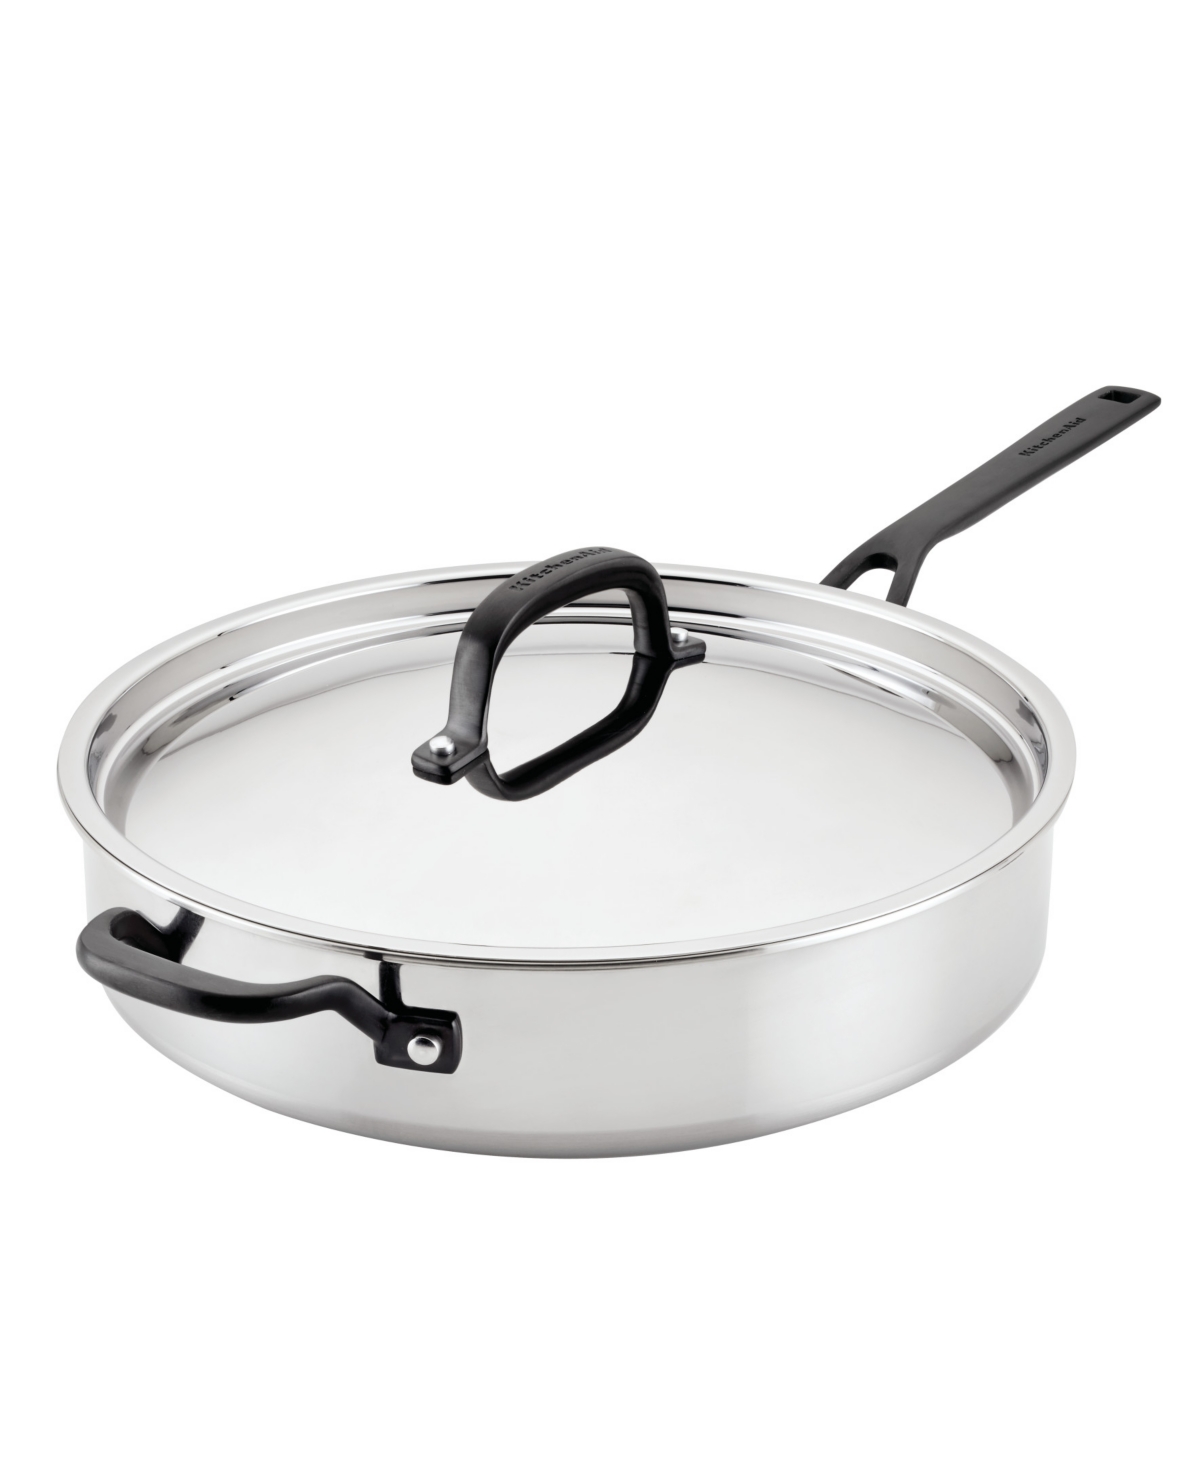 Kitchenaid 5-ply Clad Stainless Steel 5 Quart Induction Saute Pan With Lid In Polished Stainless Steel